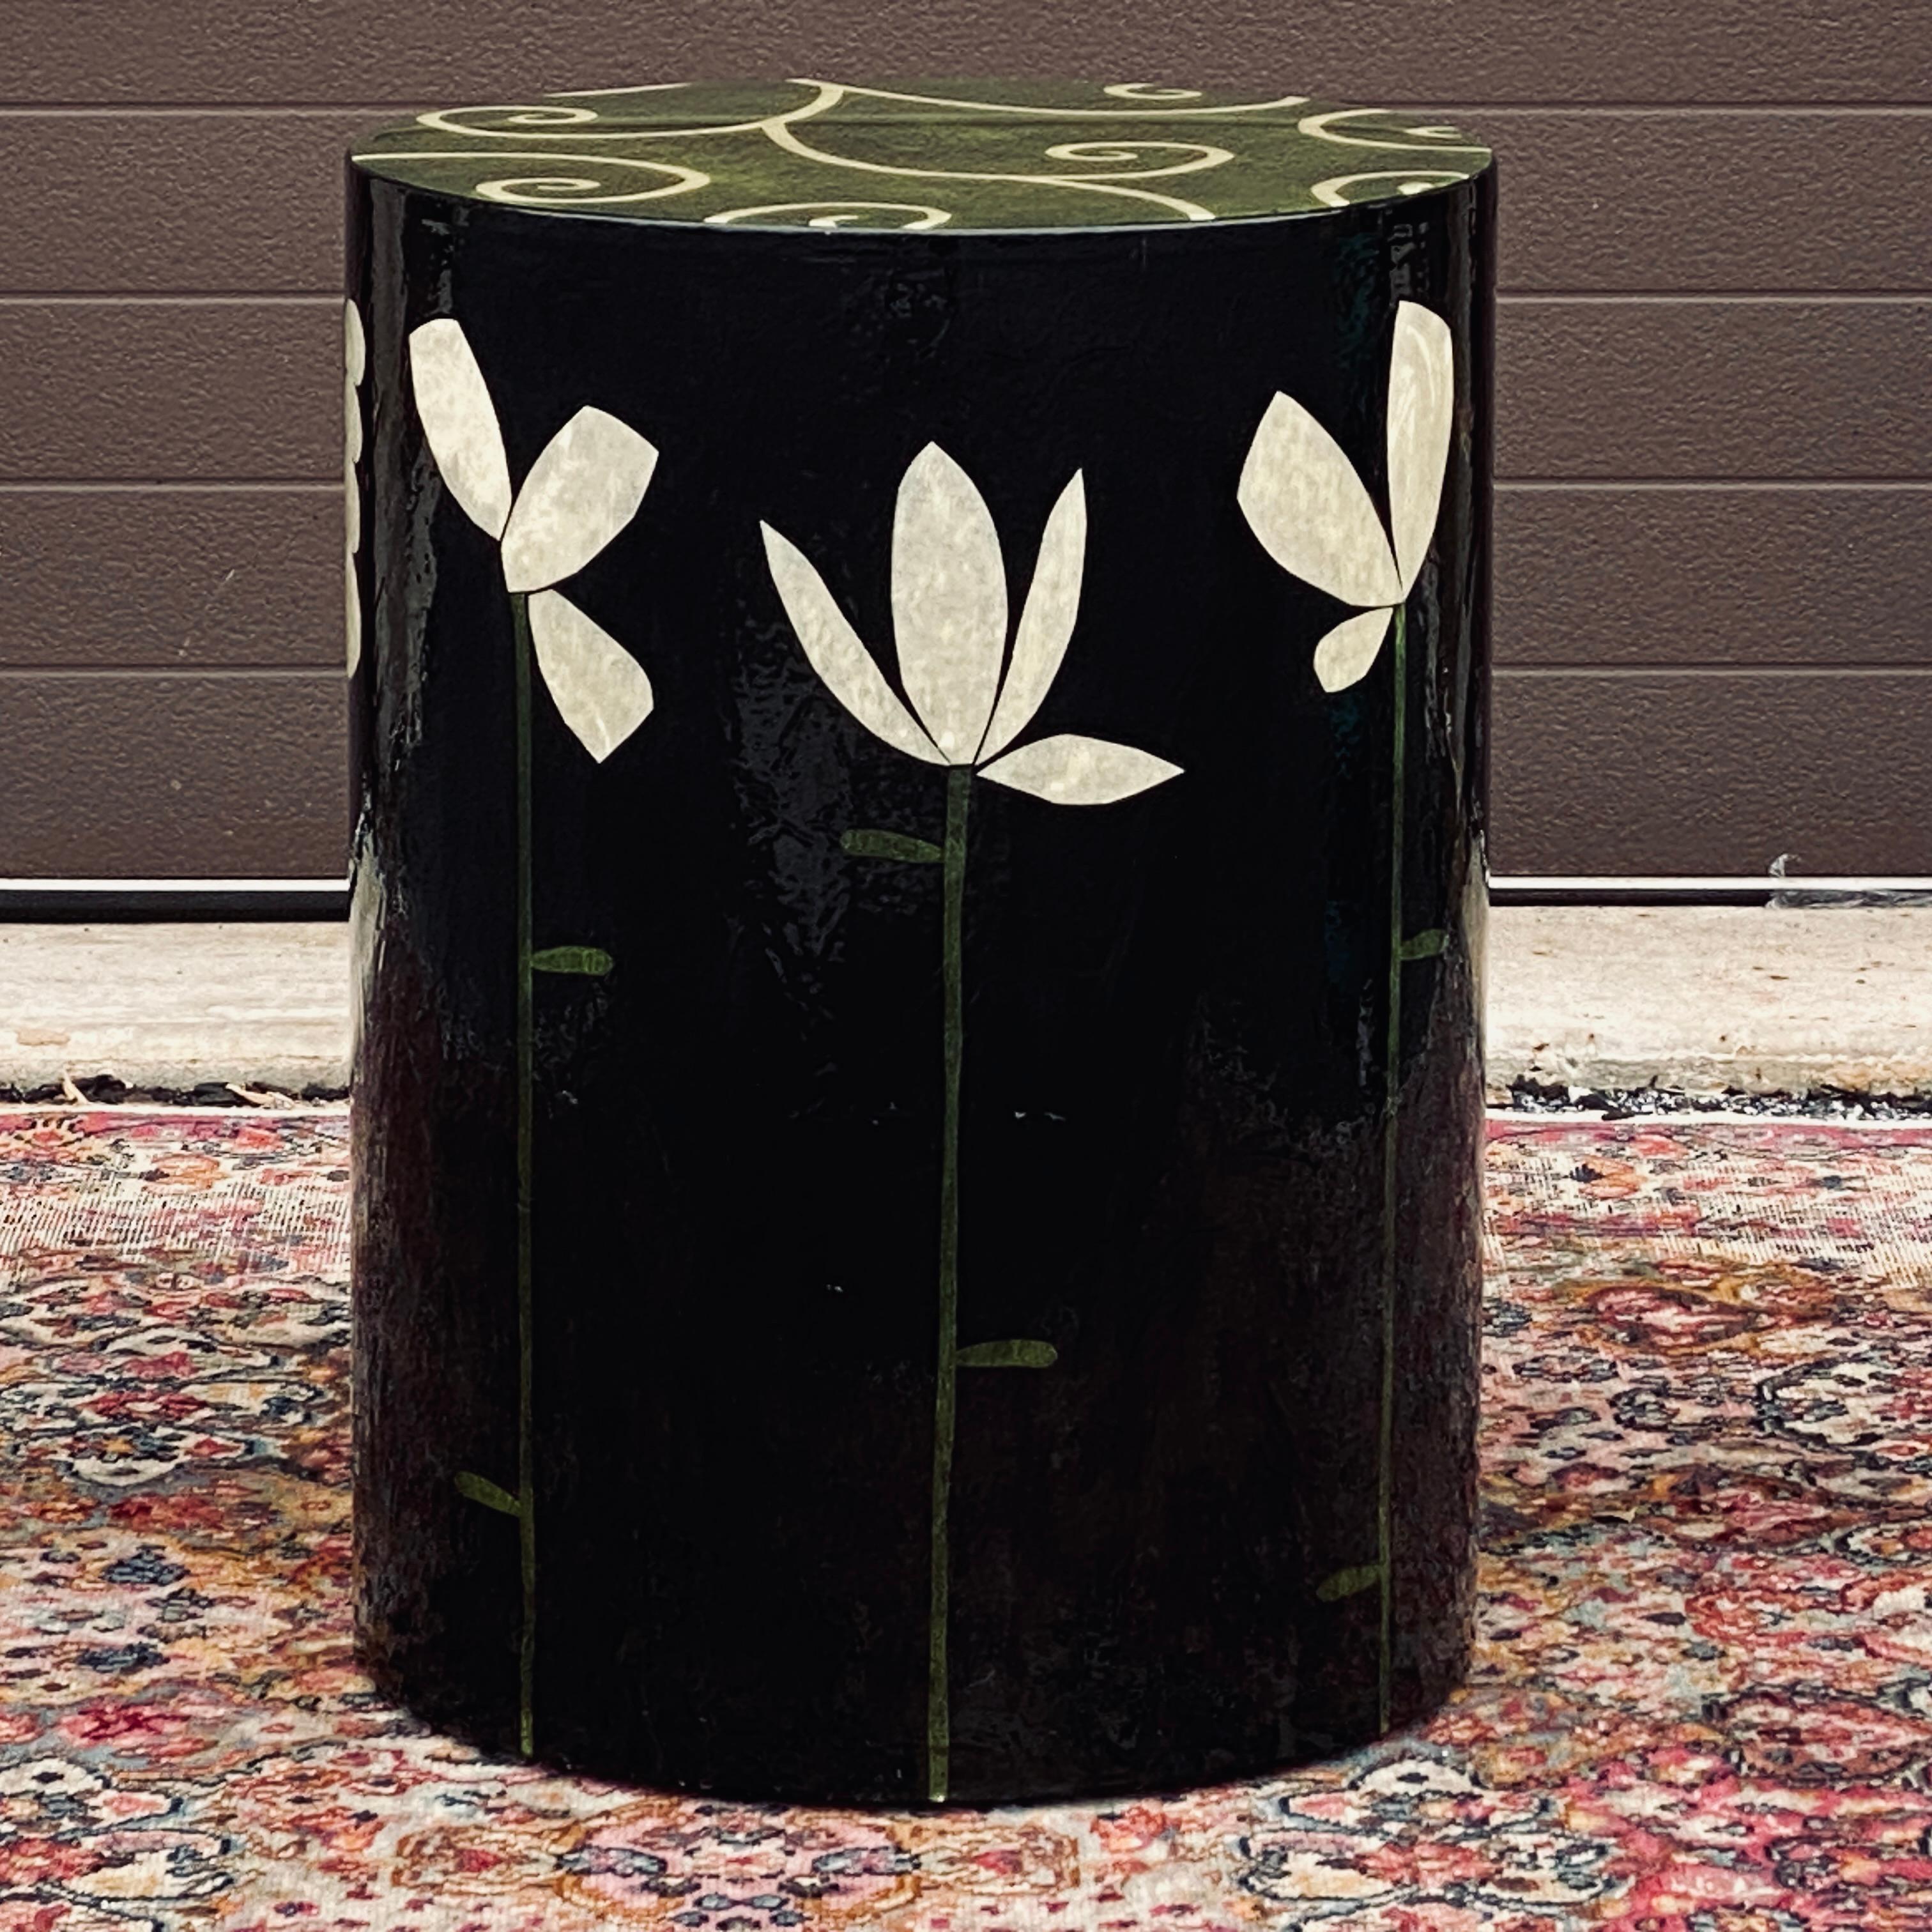 Whimsical floral folk art cylindrical side table by Sara Moore. Decorated around the circumference with green and white stems over a charcoal background. Can be moved around the room easily on the hidden casters. 